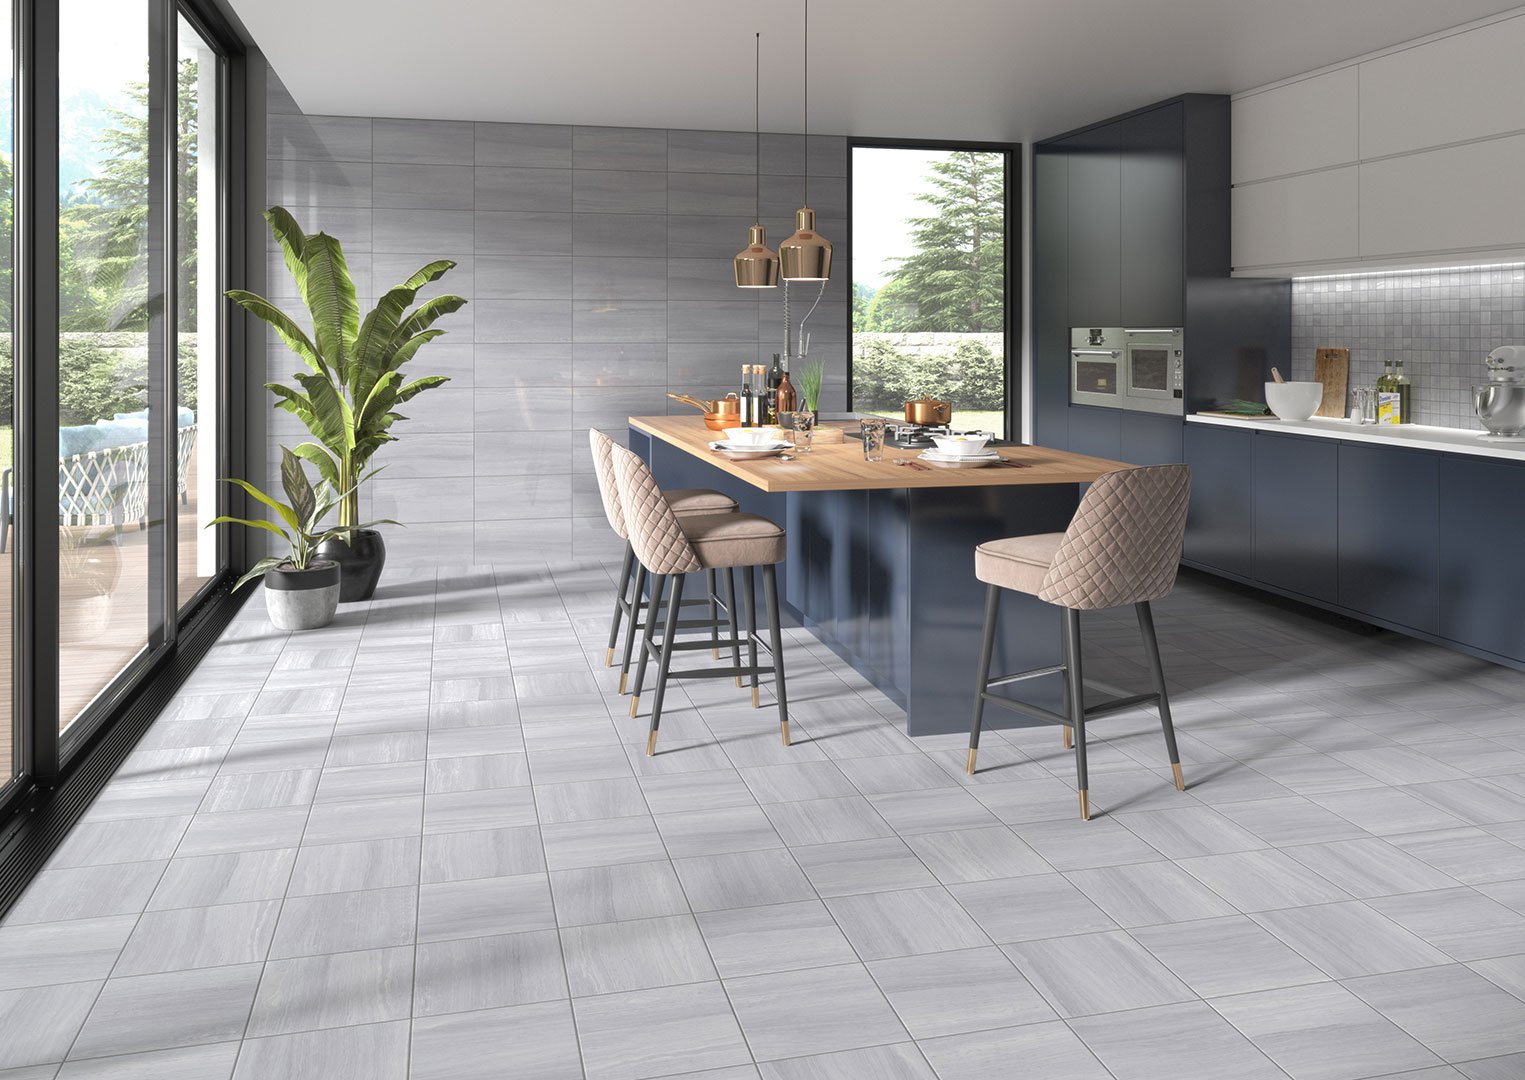 9 Beautiful Kitchen Floor Tiles that You Need to Know About